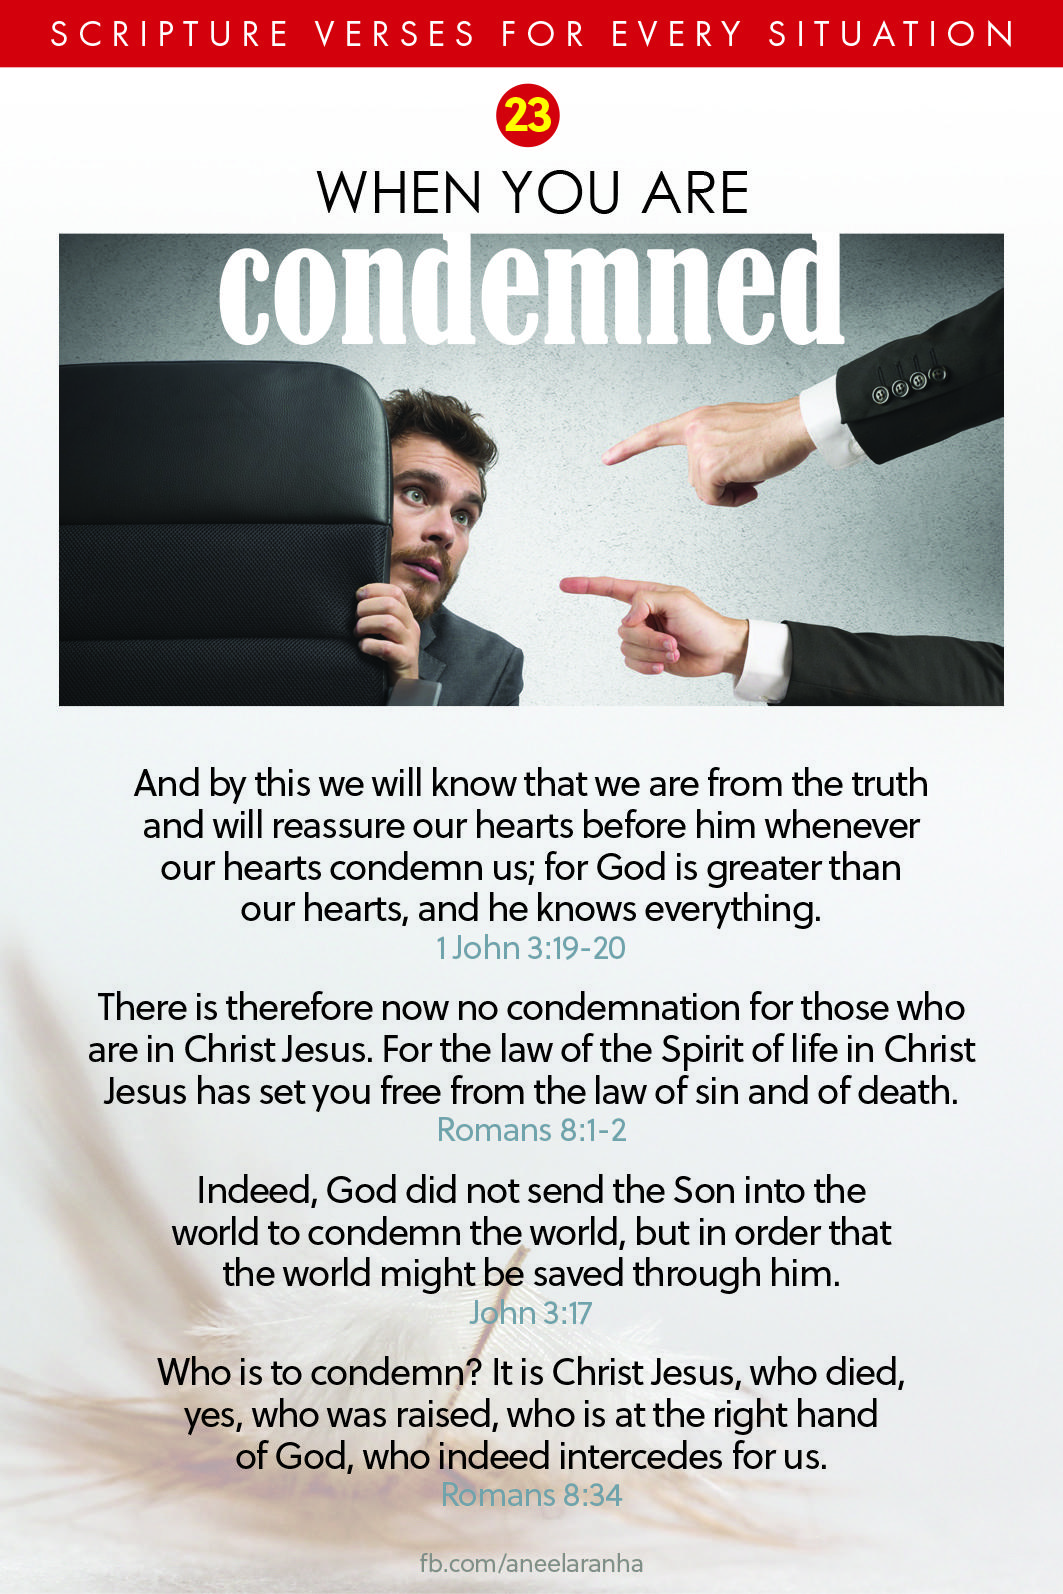 23. Do you feel condemned?